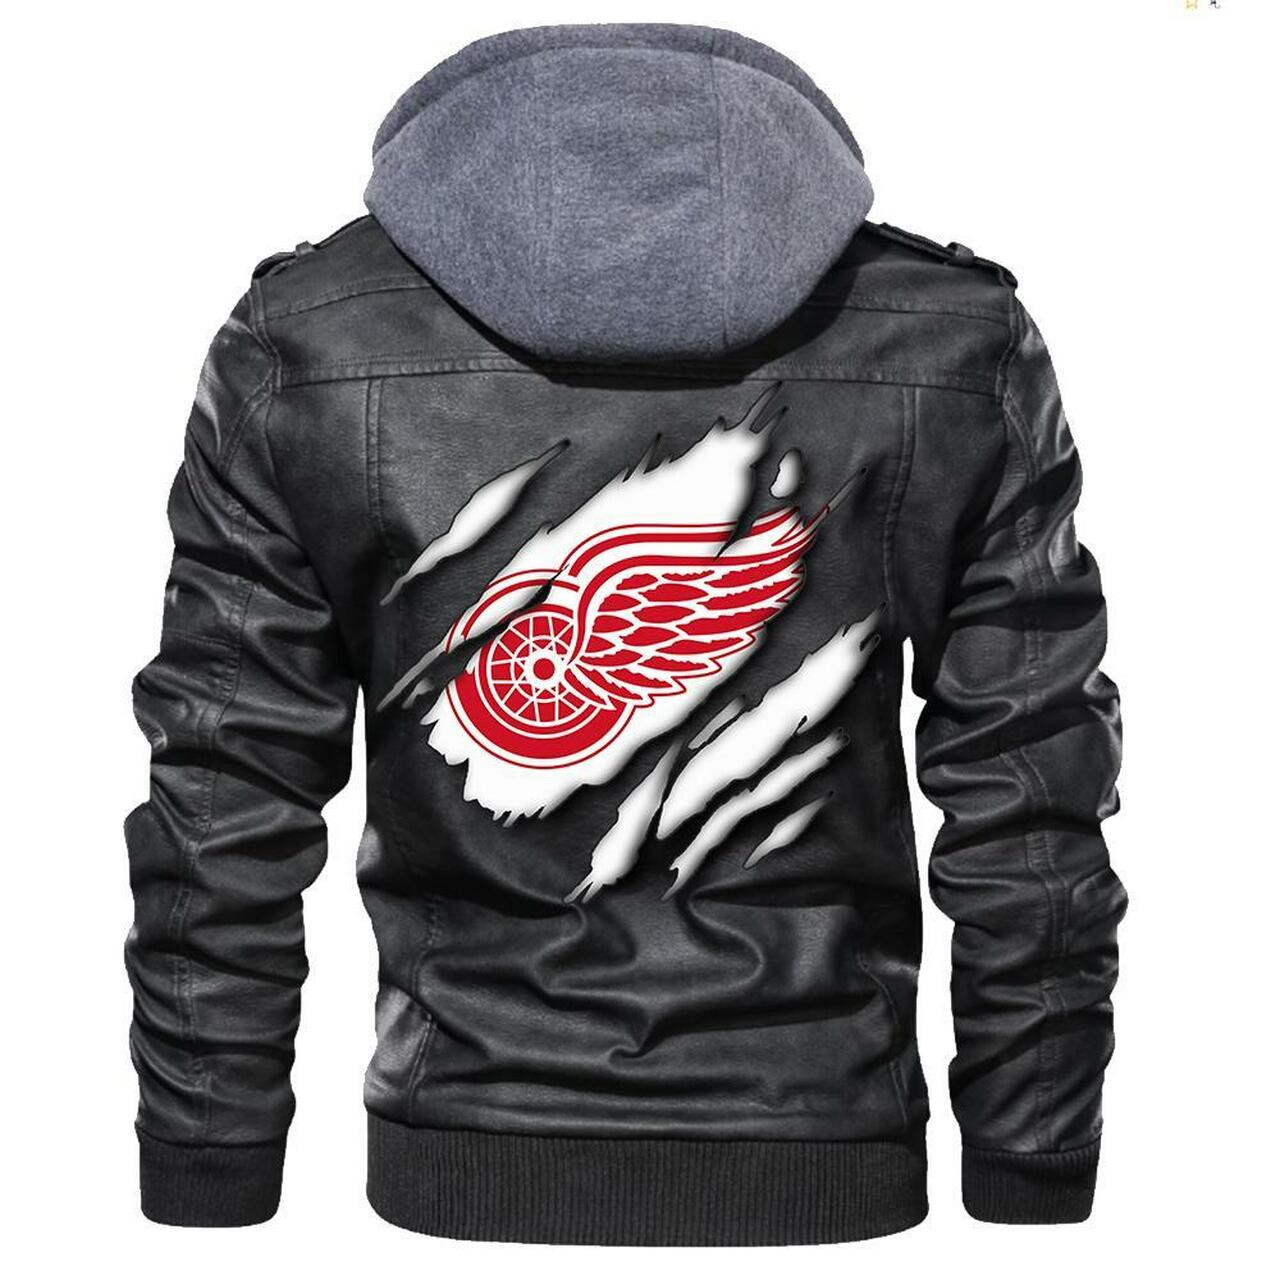 Check out and find the right leather jacket below 331